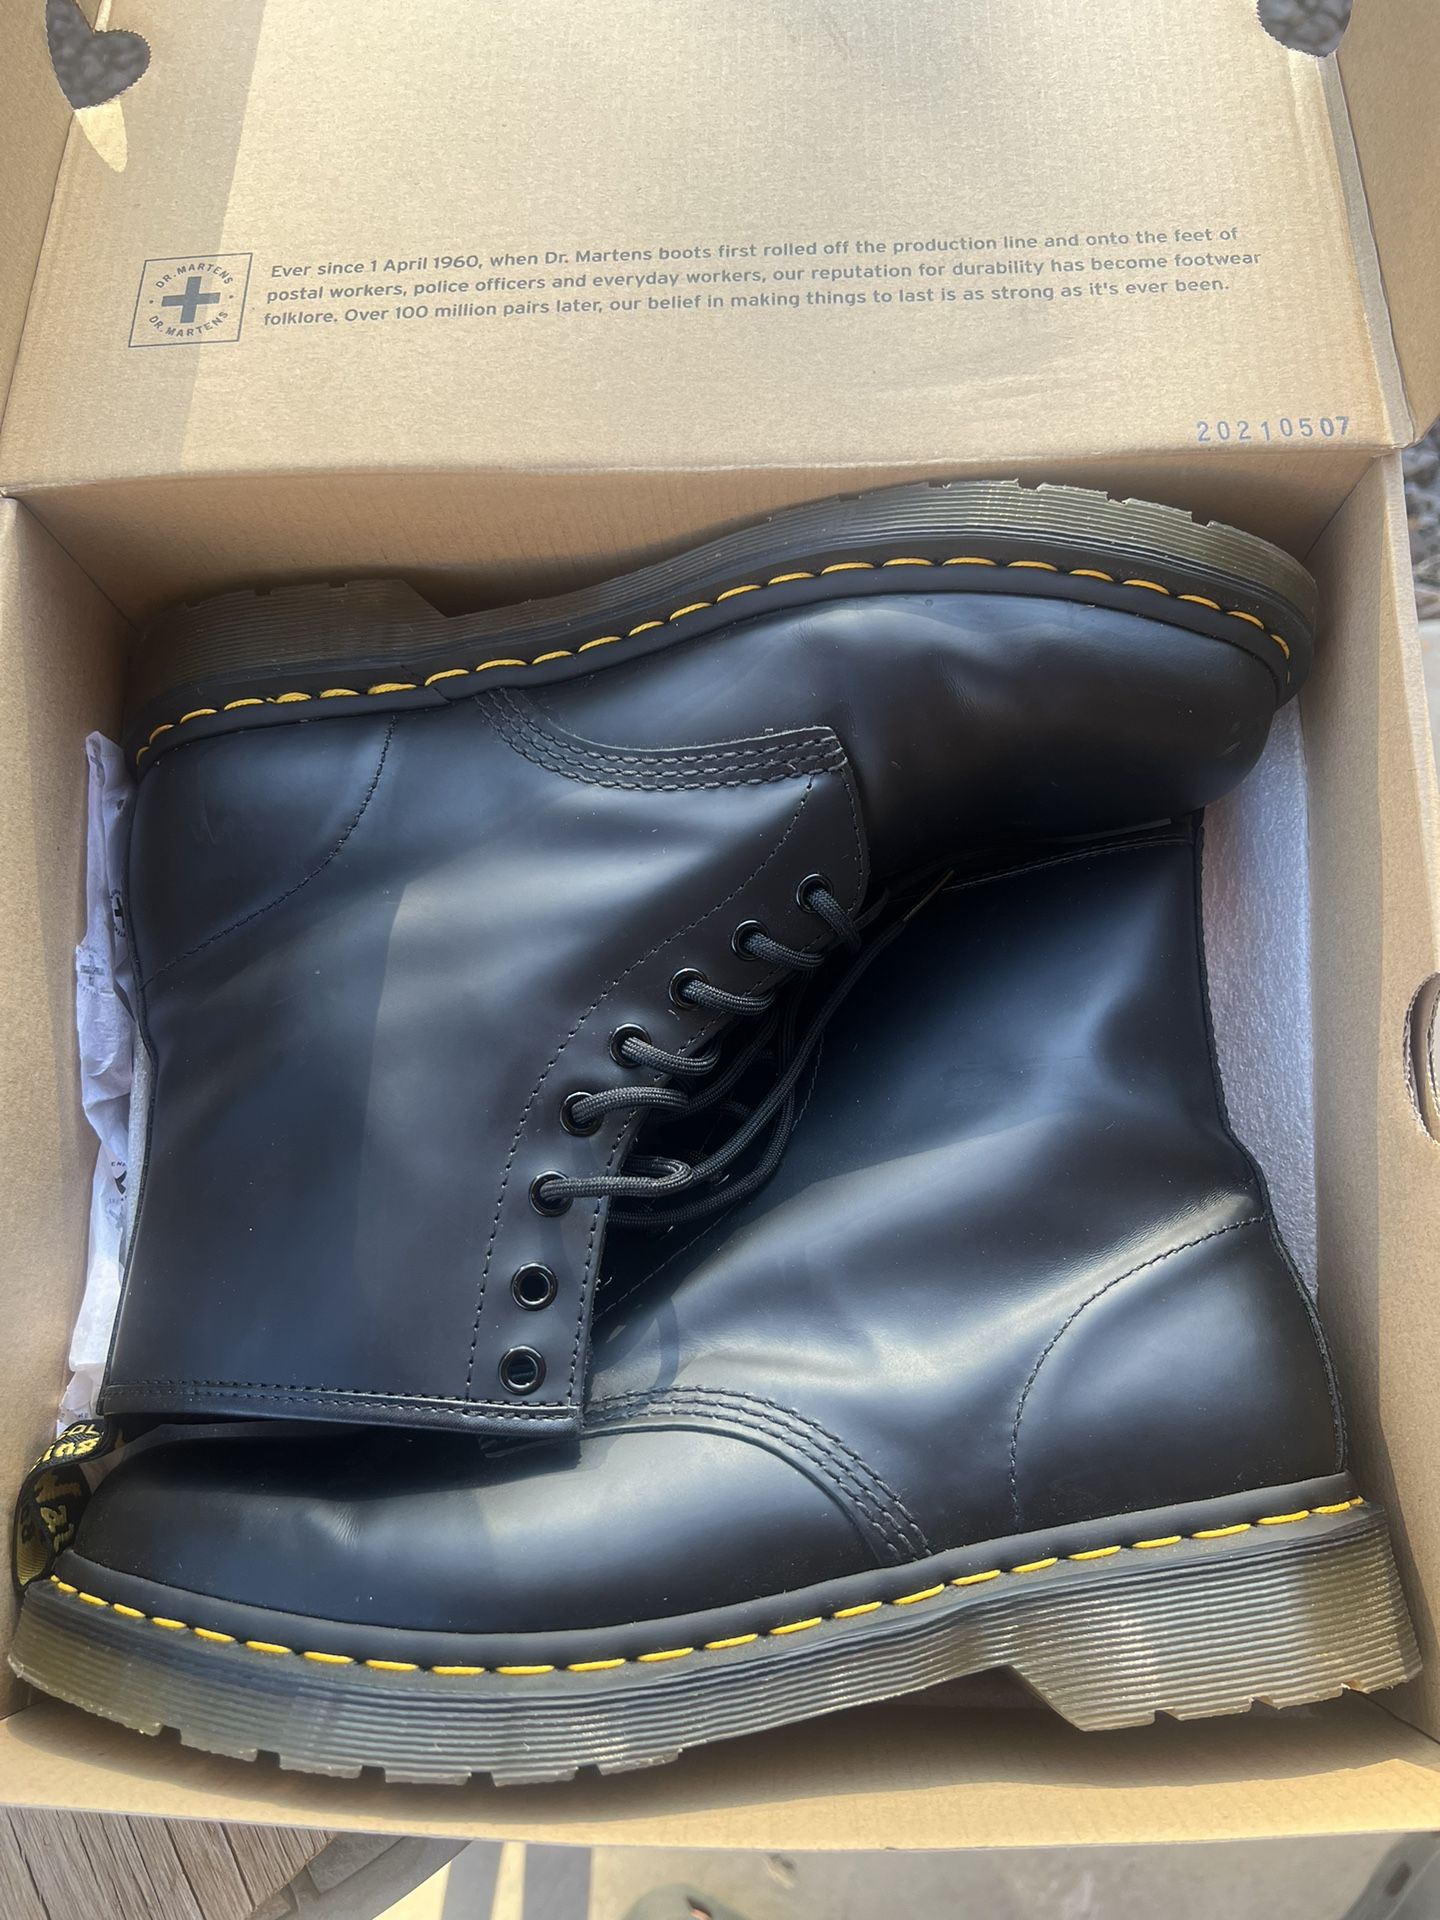 DR. MARTENS 1460 SMOOTH LEATHER LACE UP BOOTS